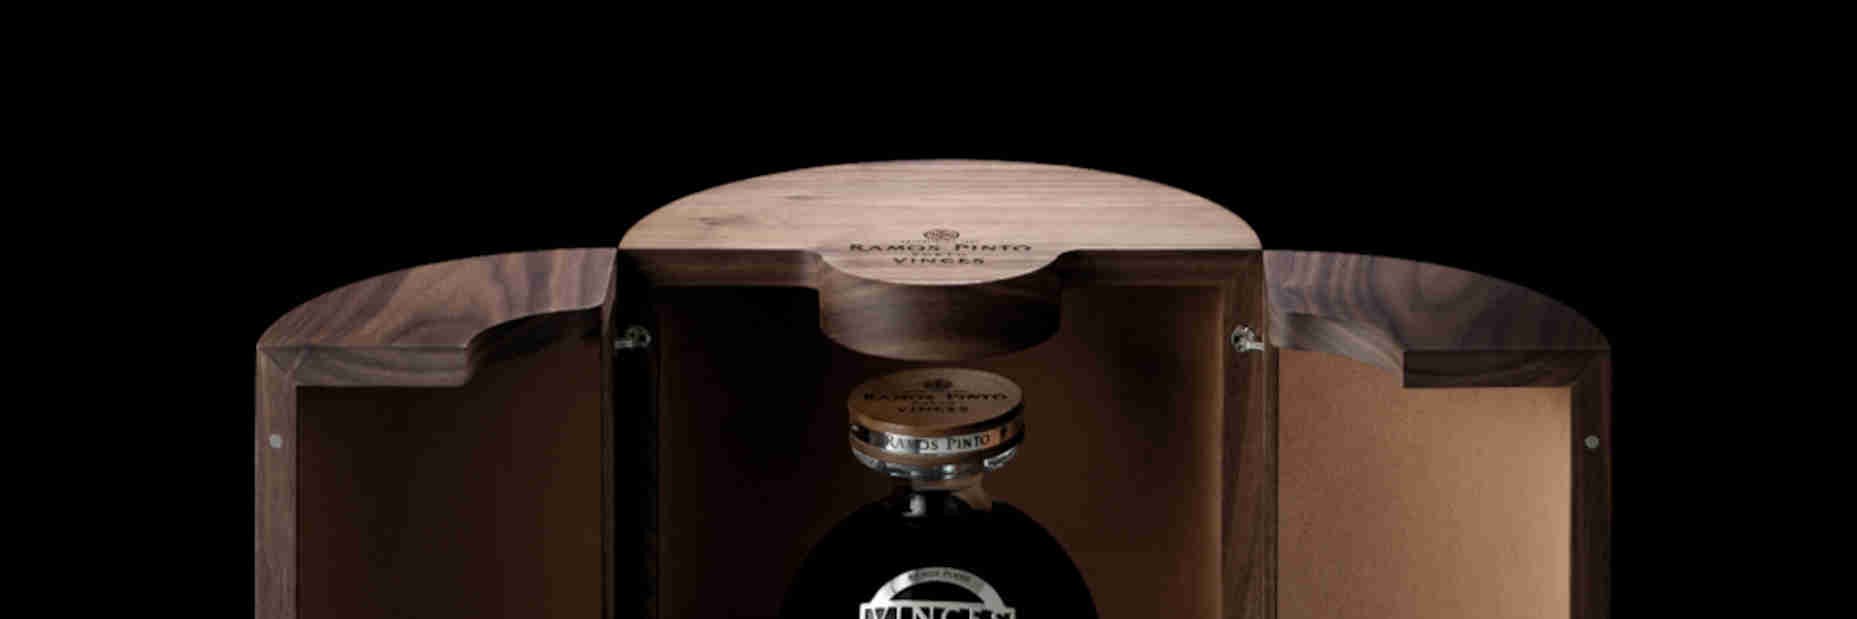 The Vinces Very Old Tawny Port in its purpose-made bottle and case